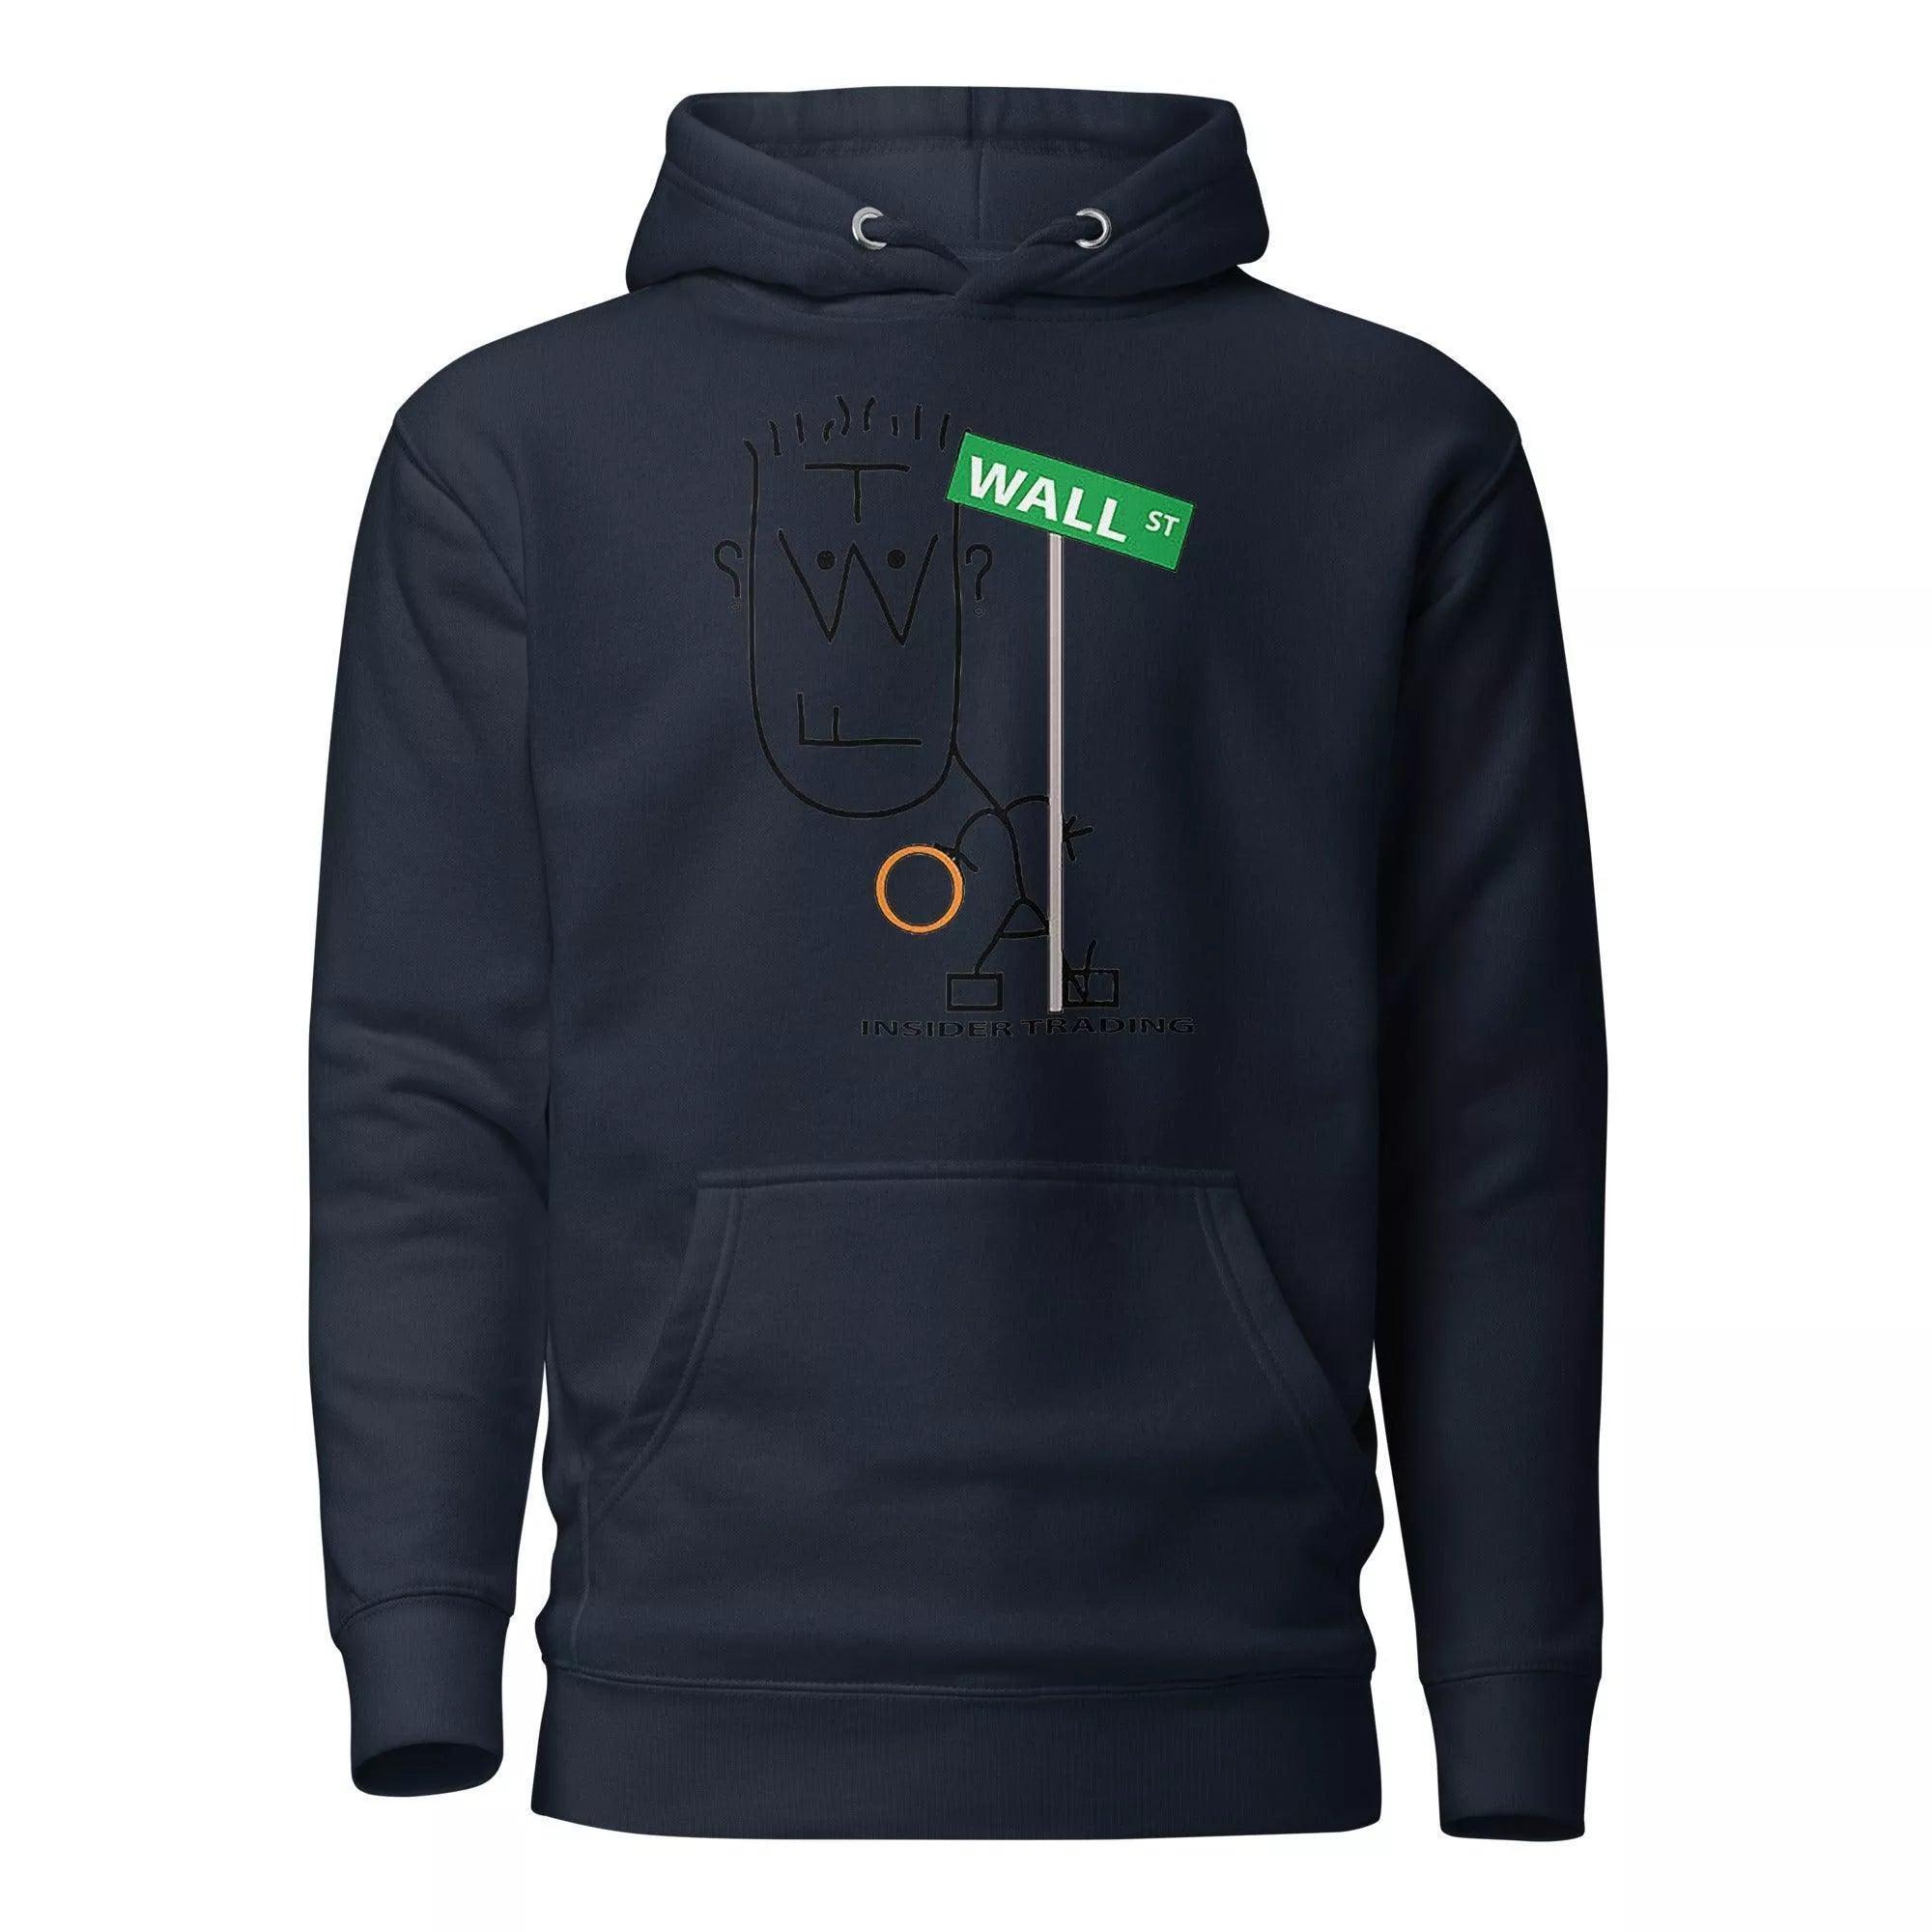 Wall Street Insider Trading Pullover Hoodie - InvestmenTees